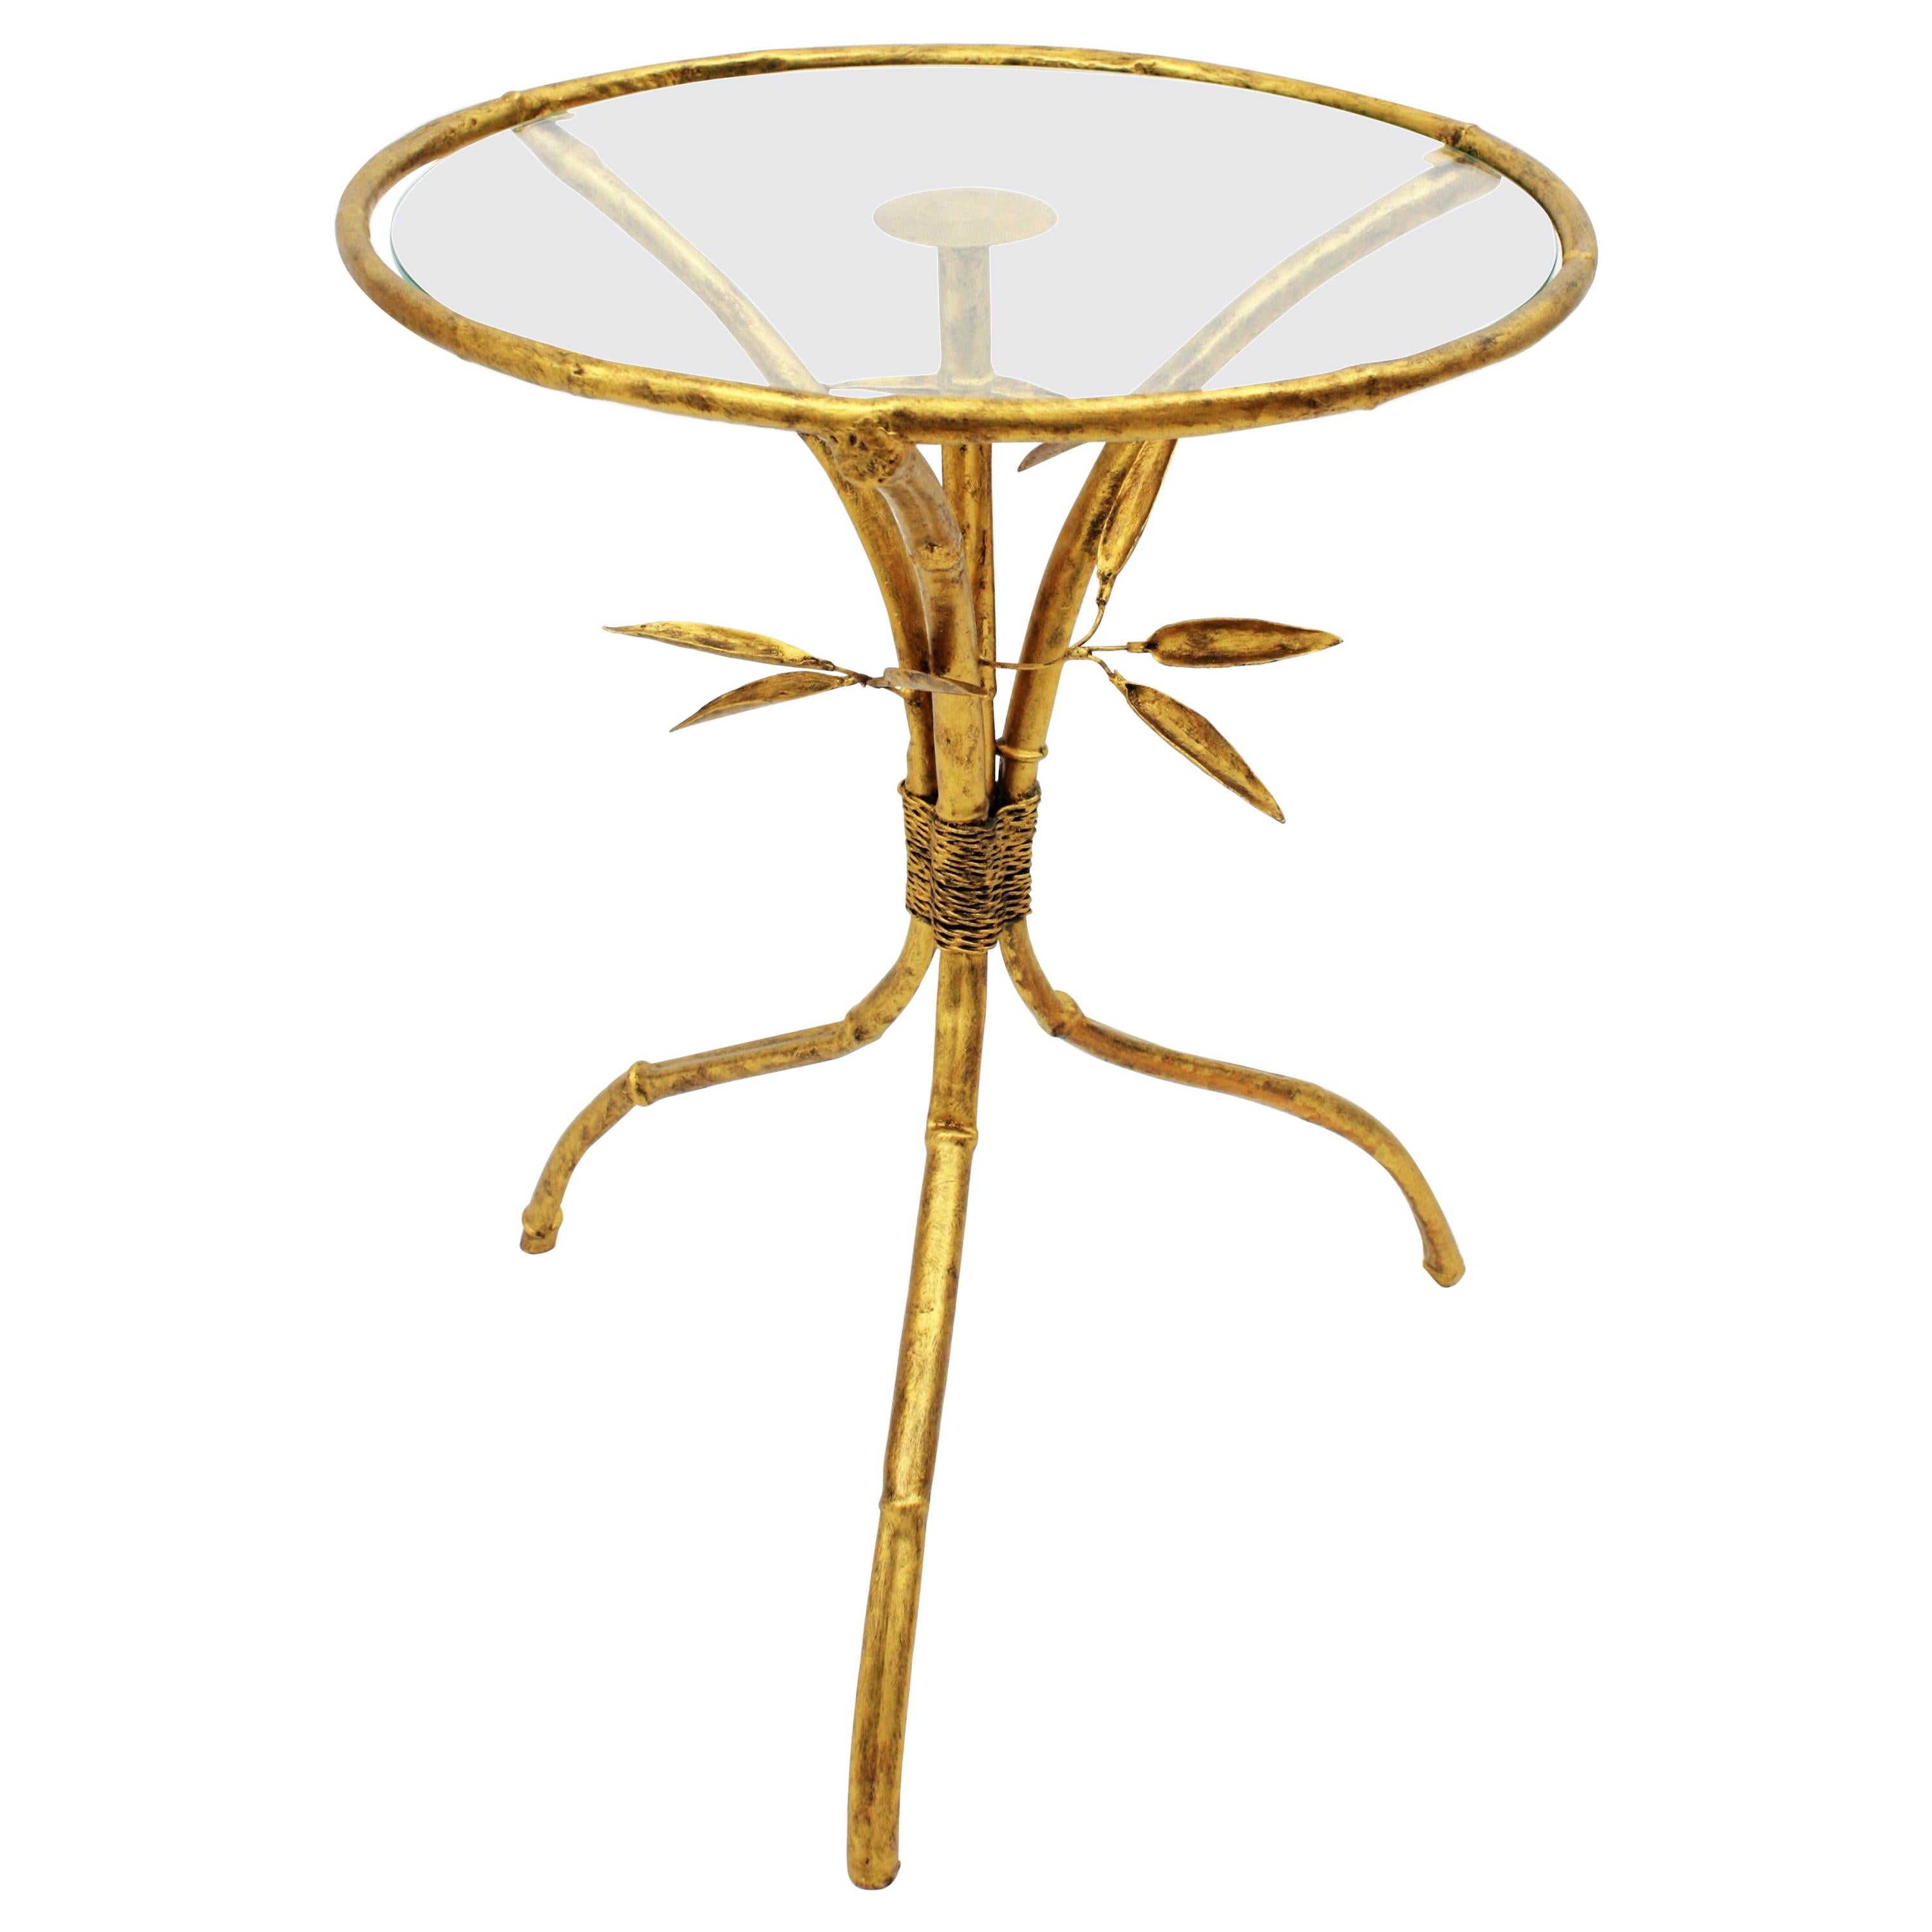 20th Century Spanish Faux Bamboo Gilt Iron Round Side Table or Drinks Table, 1950s